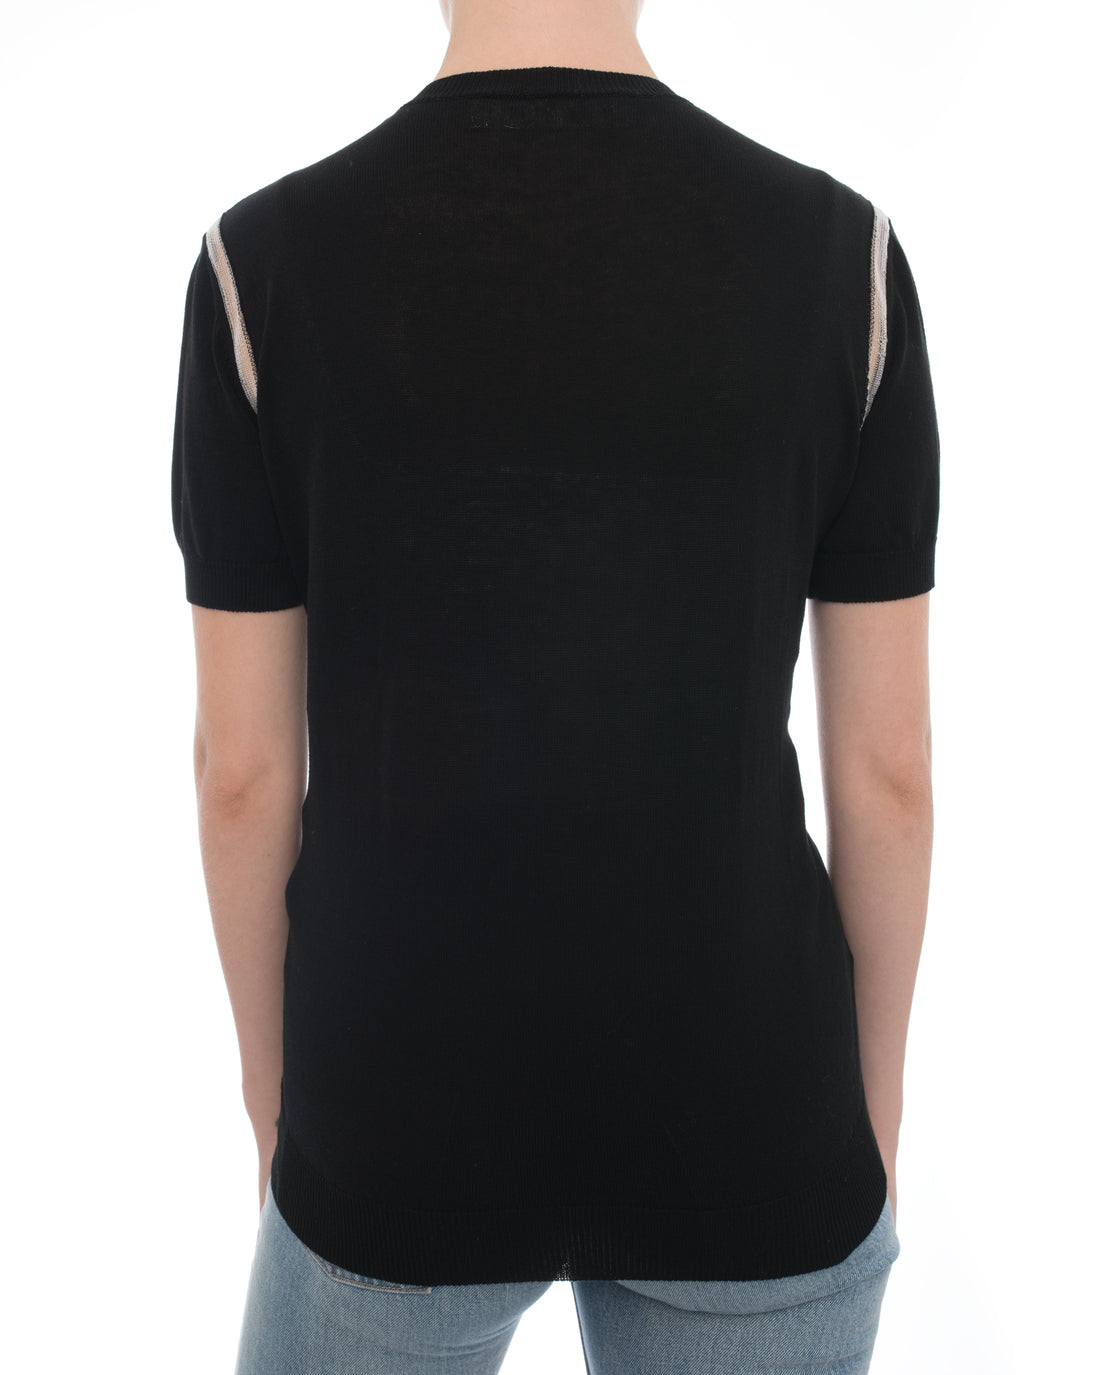 Marni Black Knit Short Sleeve Top with Jewelled Neckline - 6